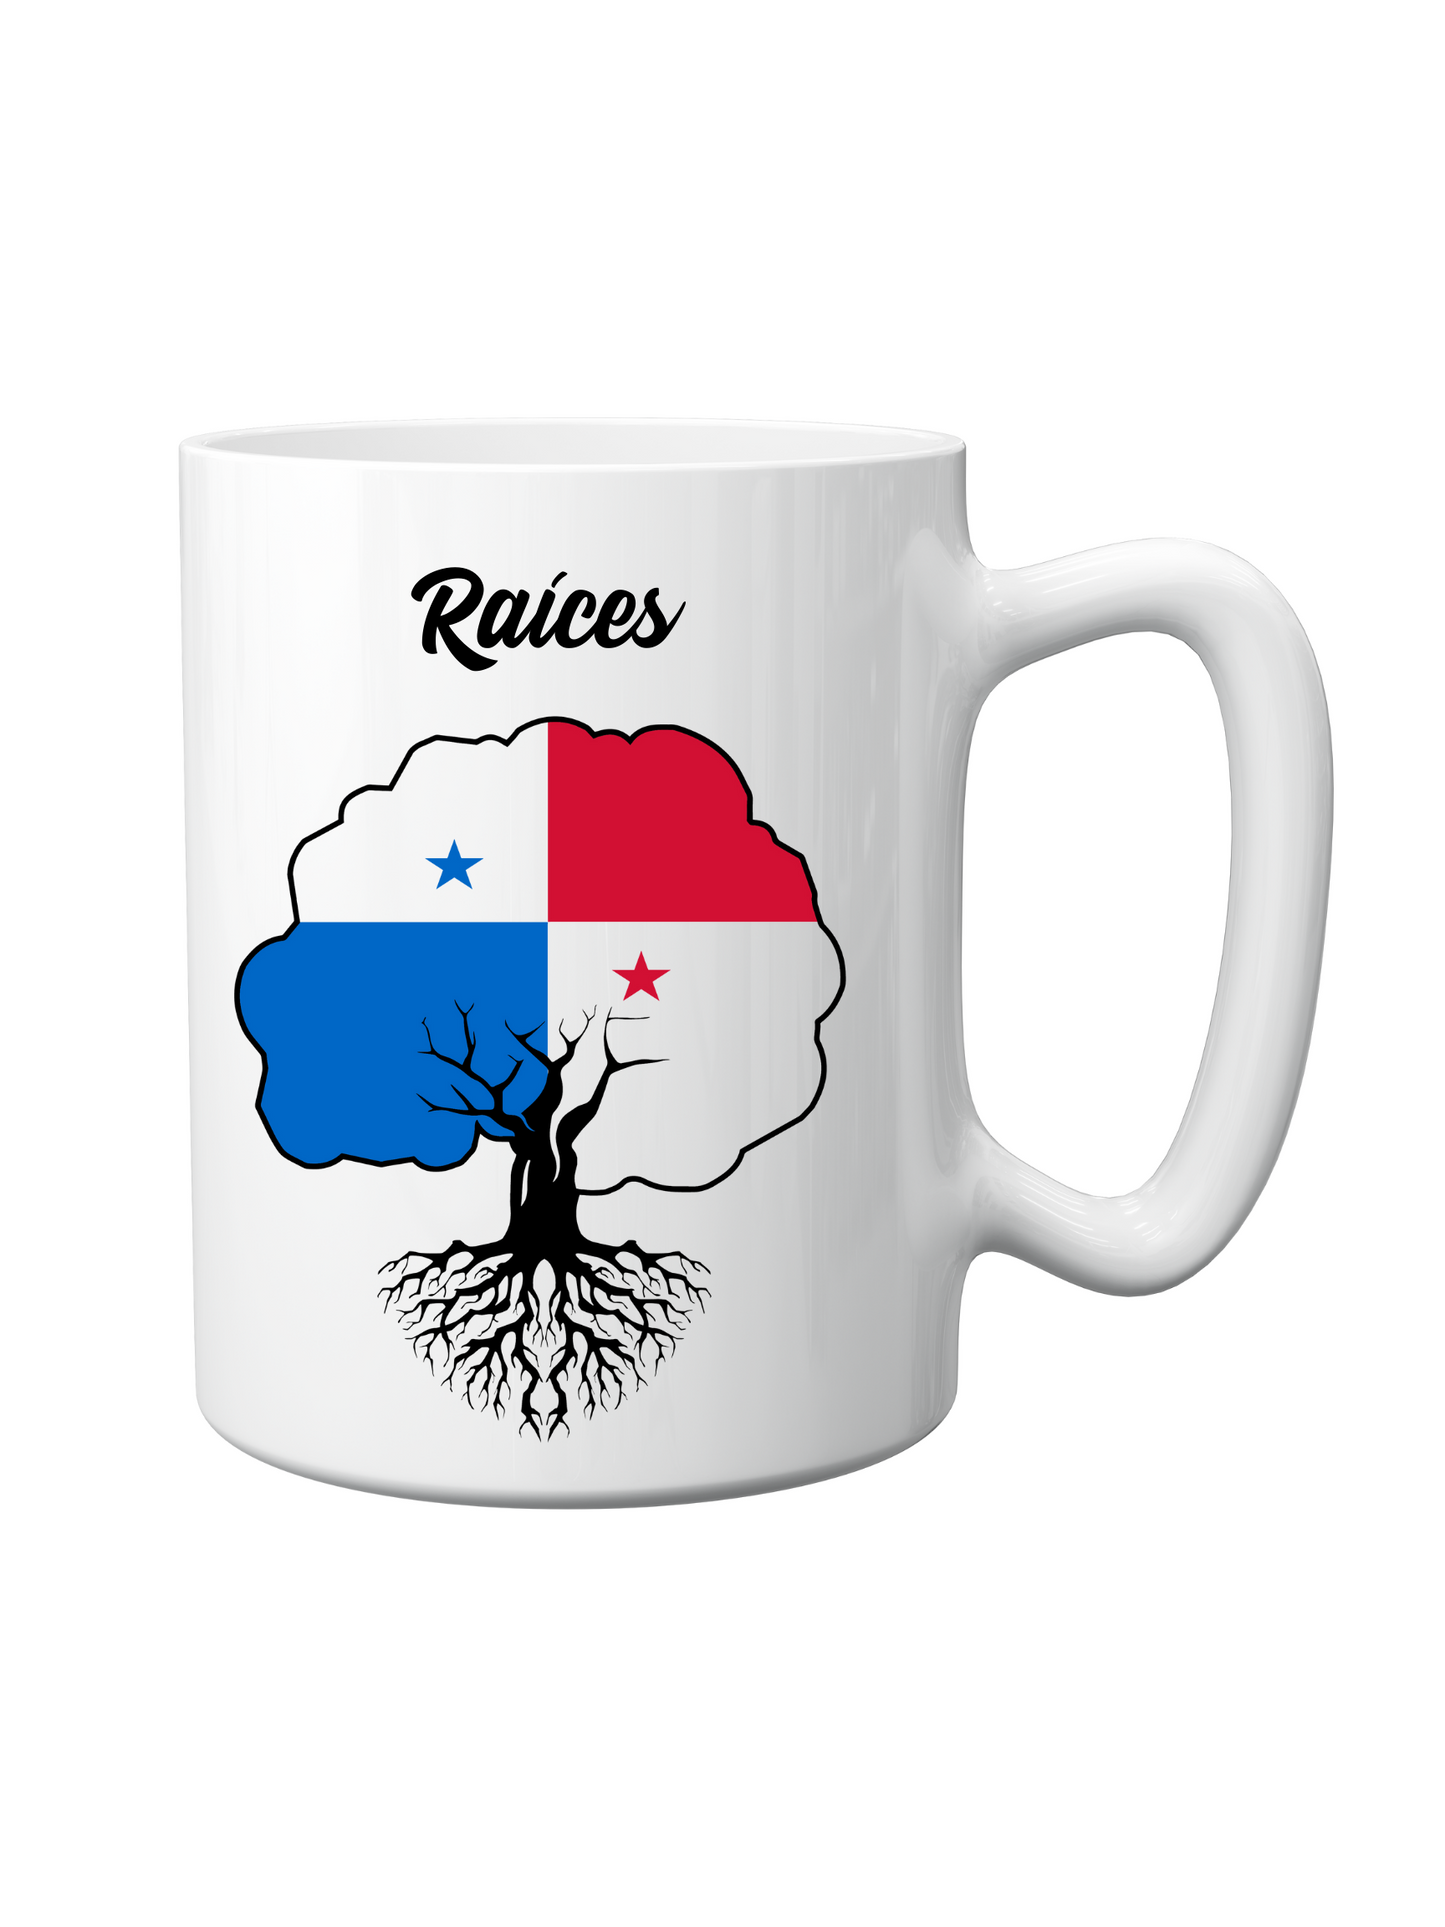 Two Anointed Hands - Raices Mug